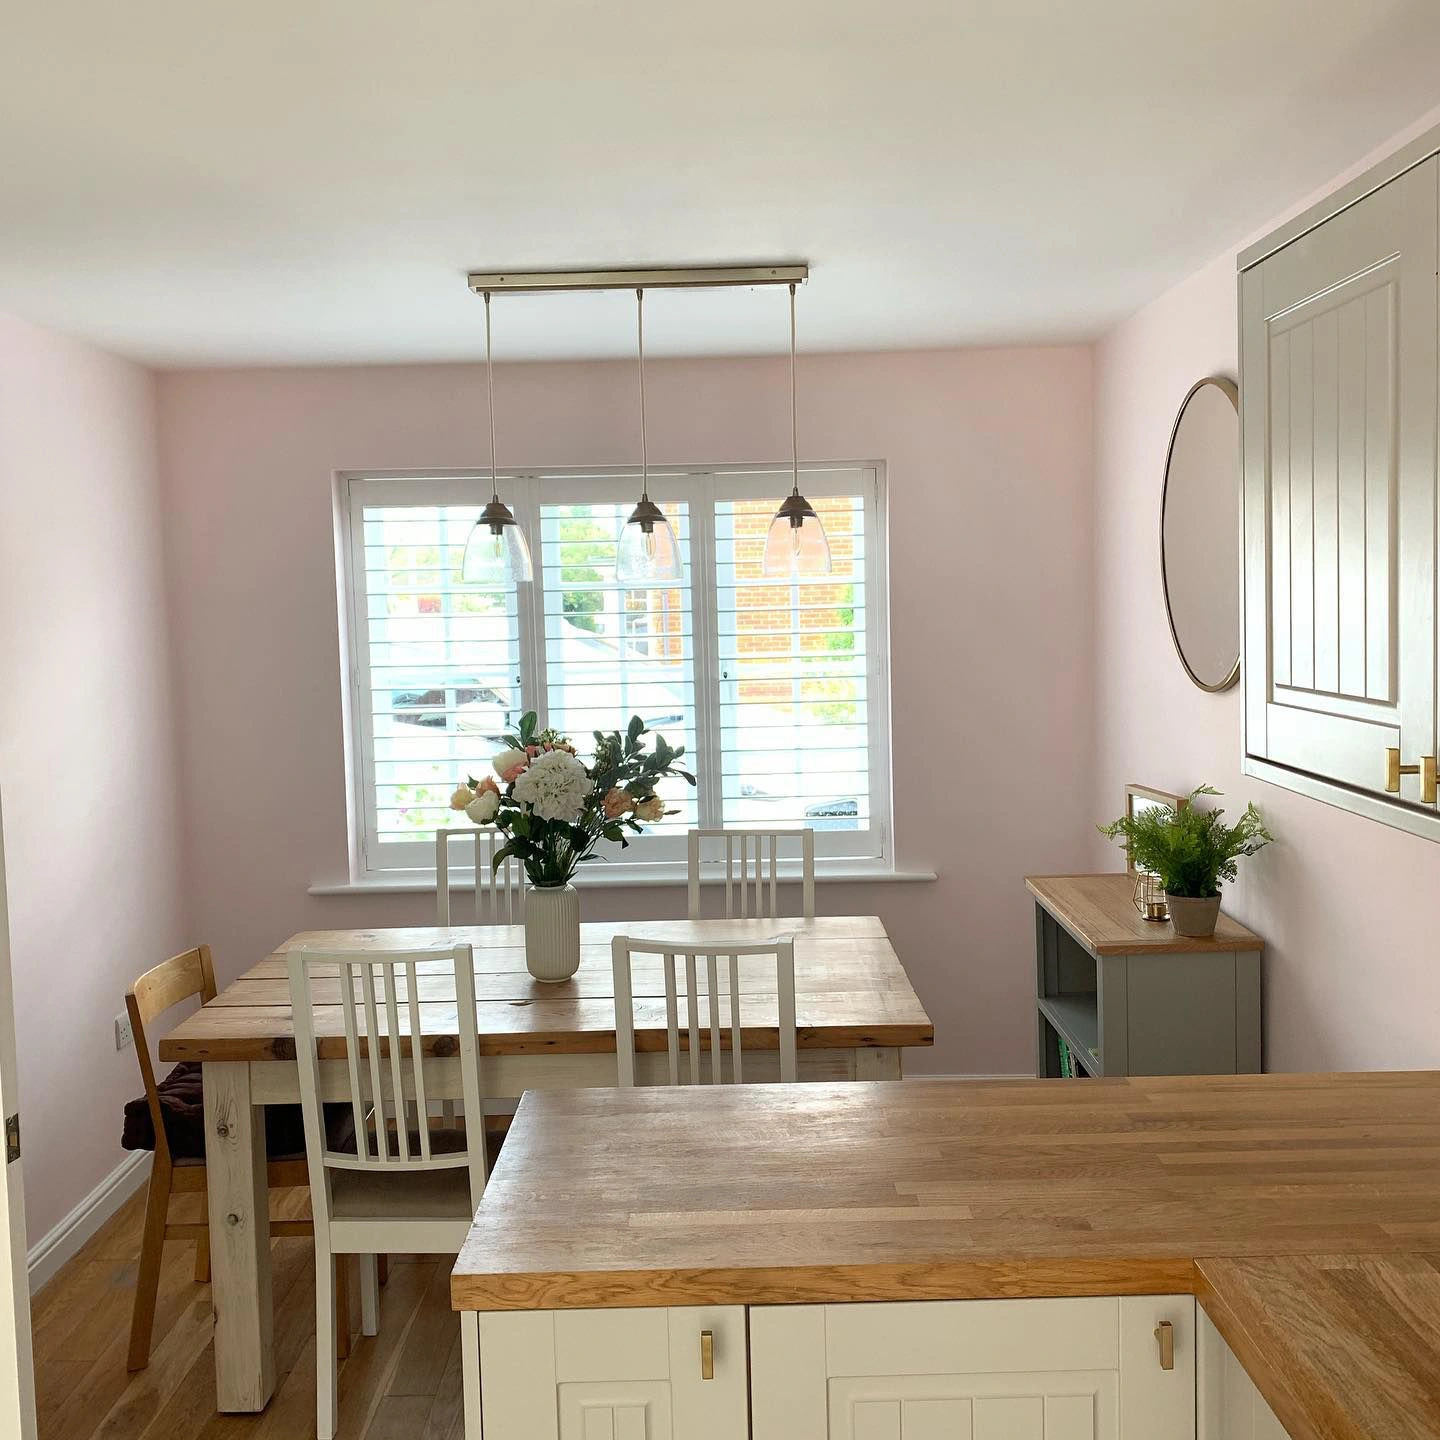 Farrow and Ball Middleton Pink 245 dining room